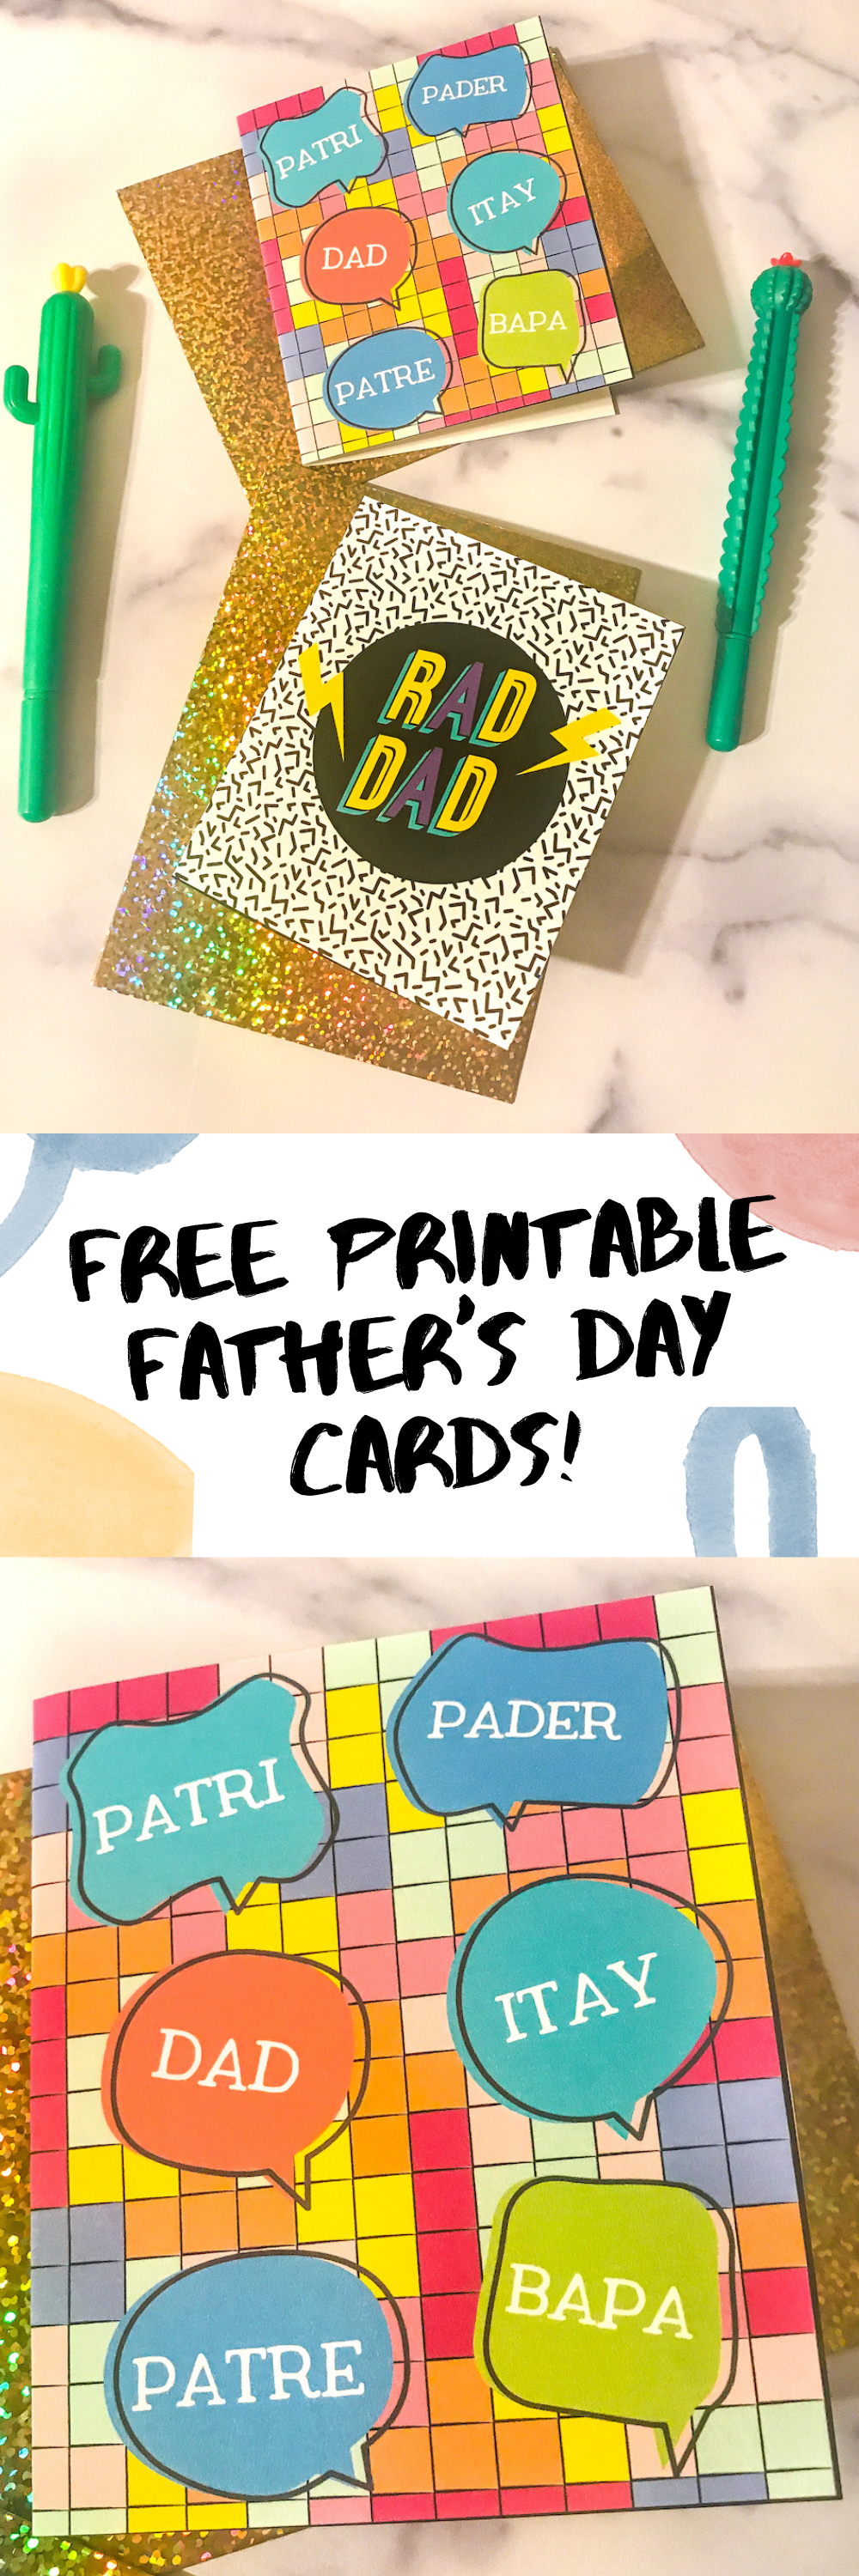  Father's Day Printable Cards Pin